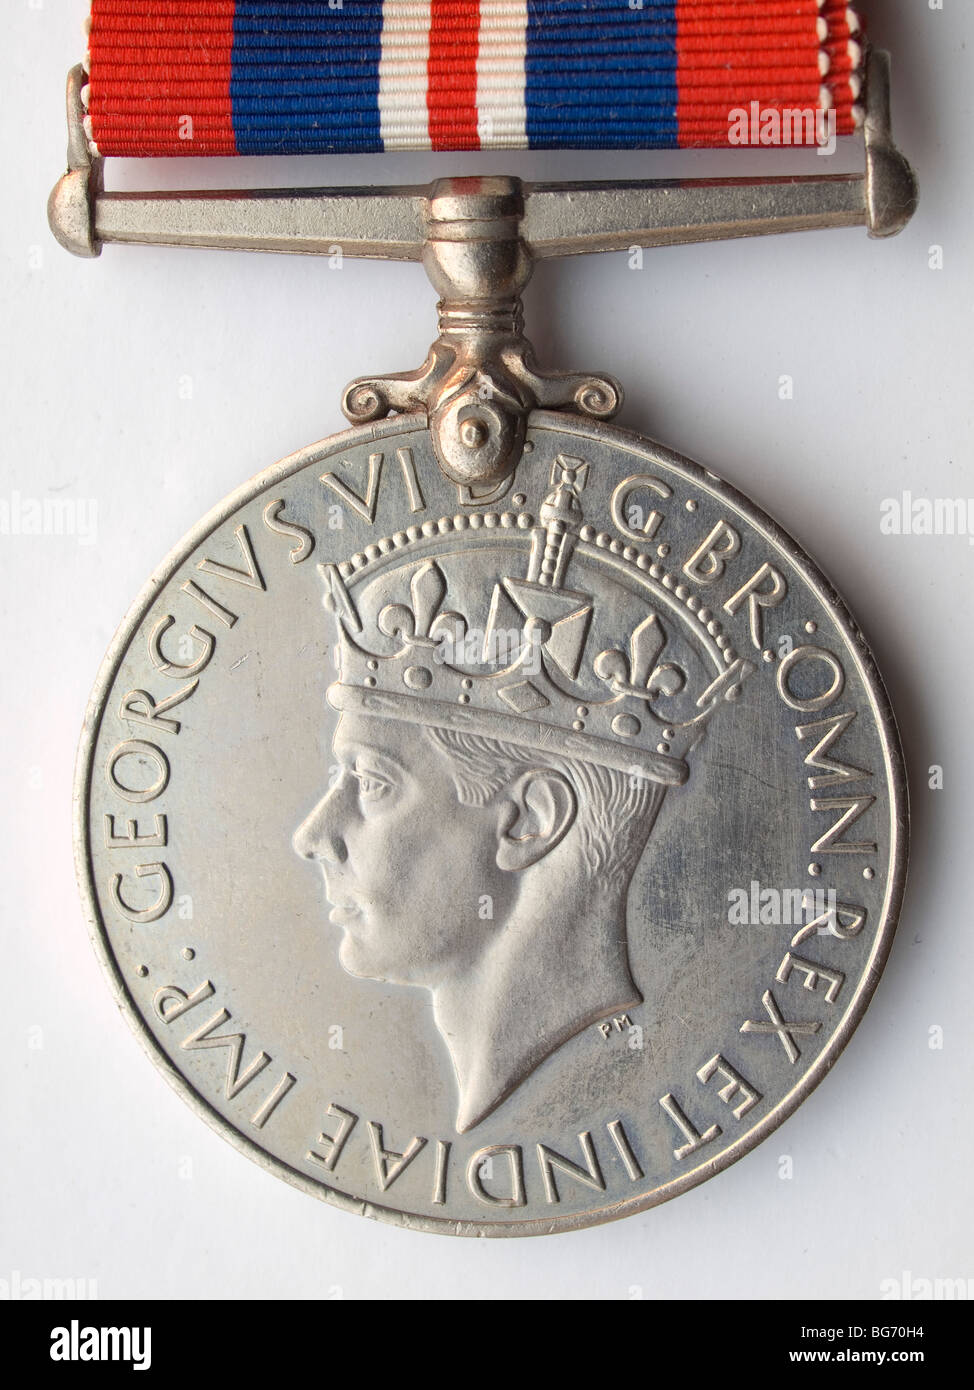 Close up of a World War 2 Medal awarded to British and Commonwealth Troops 1939-45 on a white background  Stock Photo